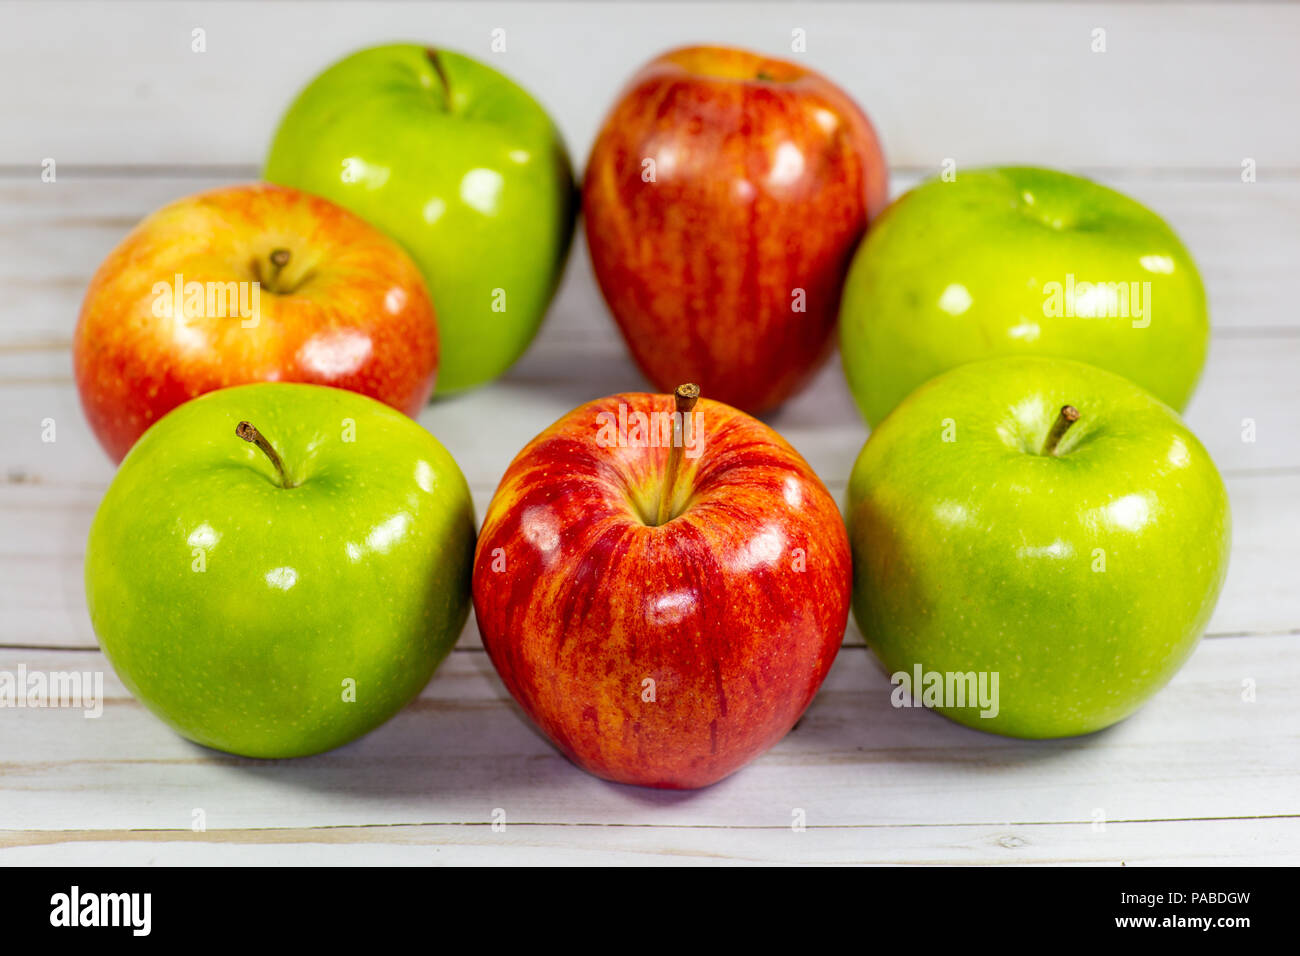 Green and red apples waiting to be eaten on the kitchen table Stock Photo